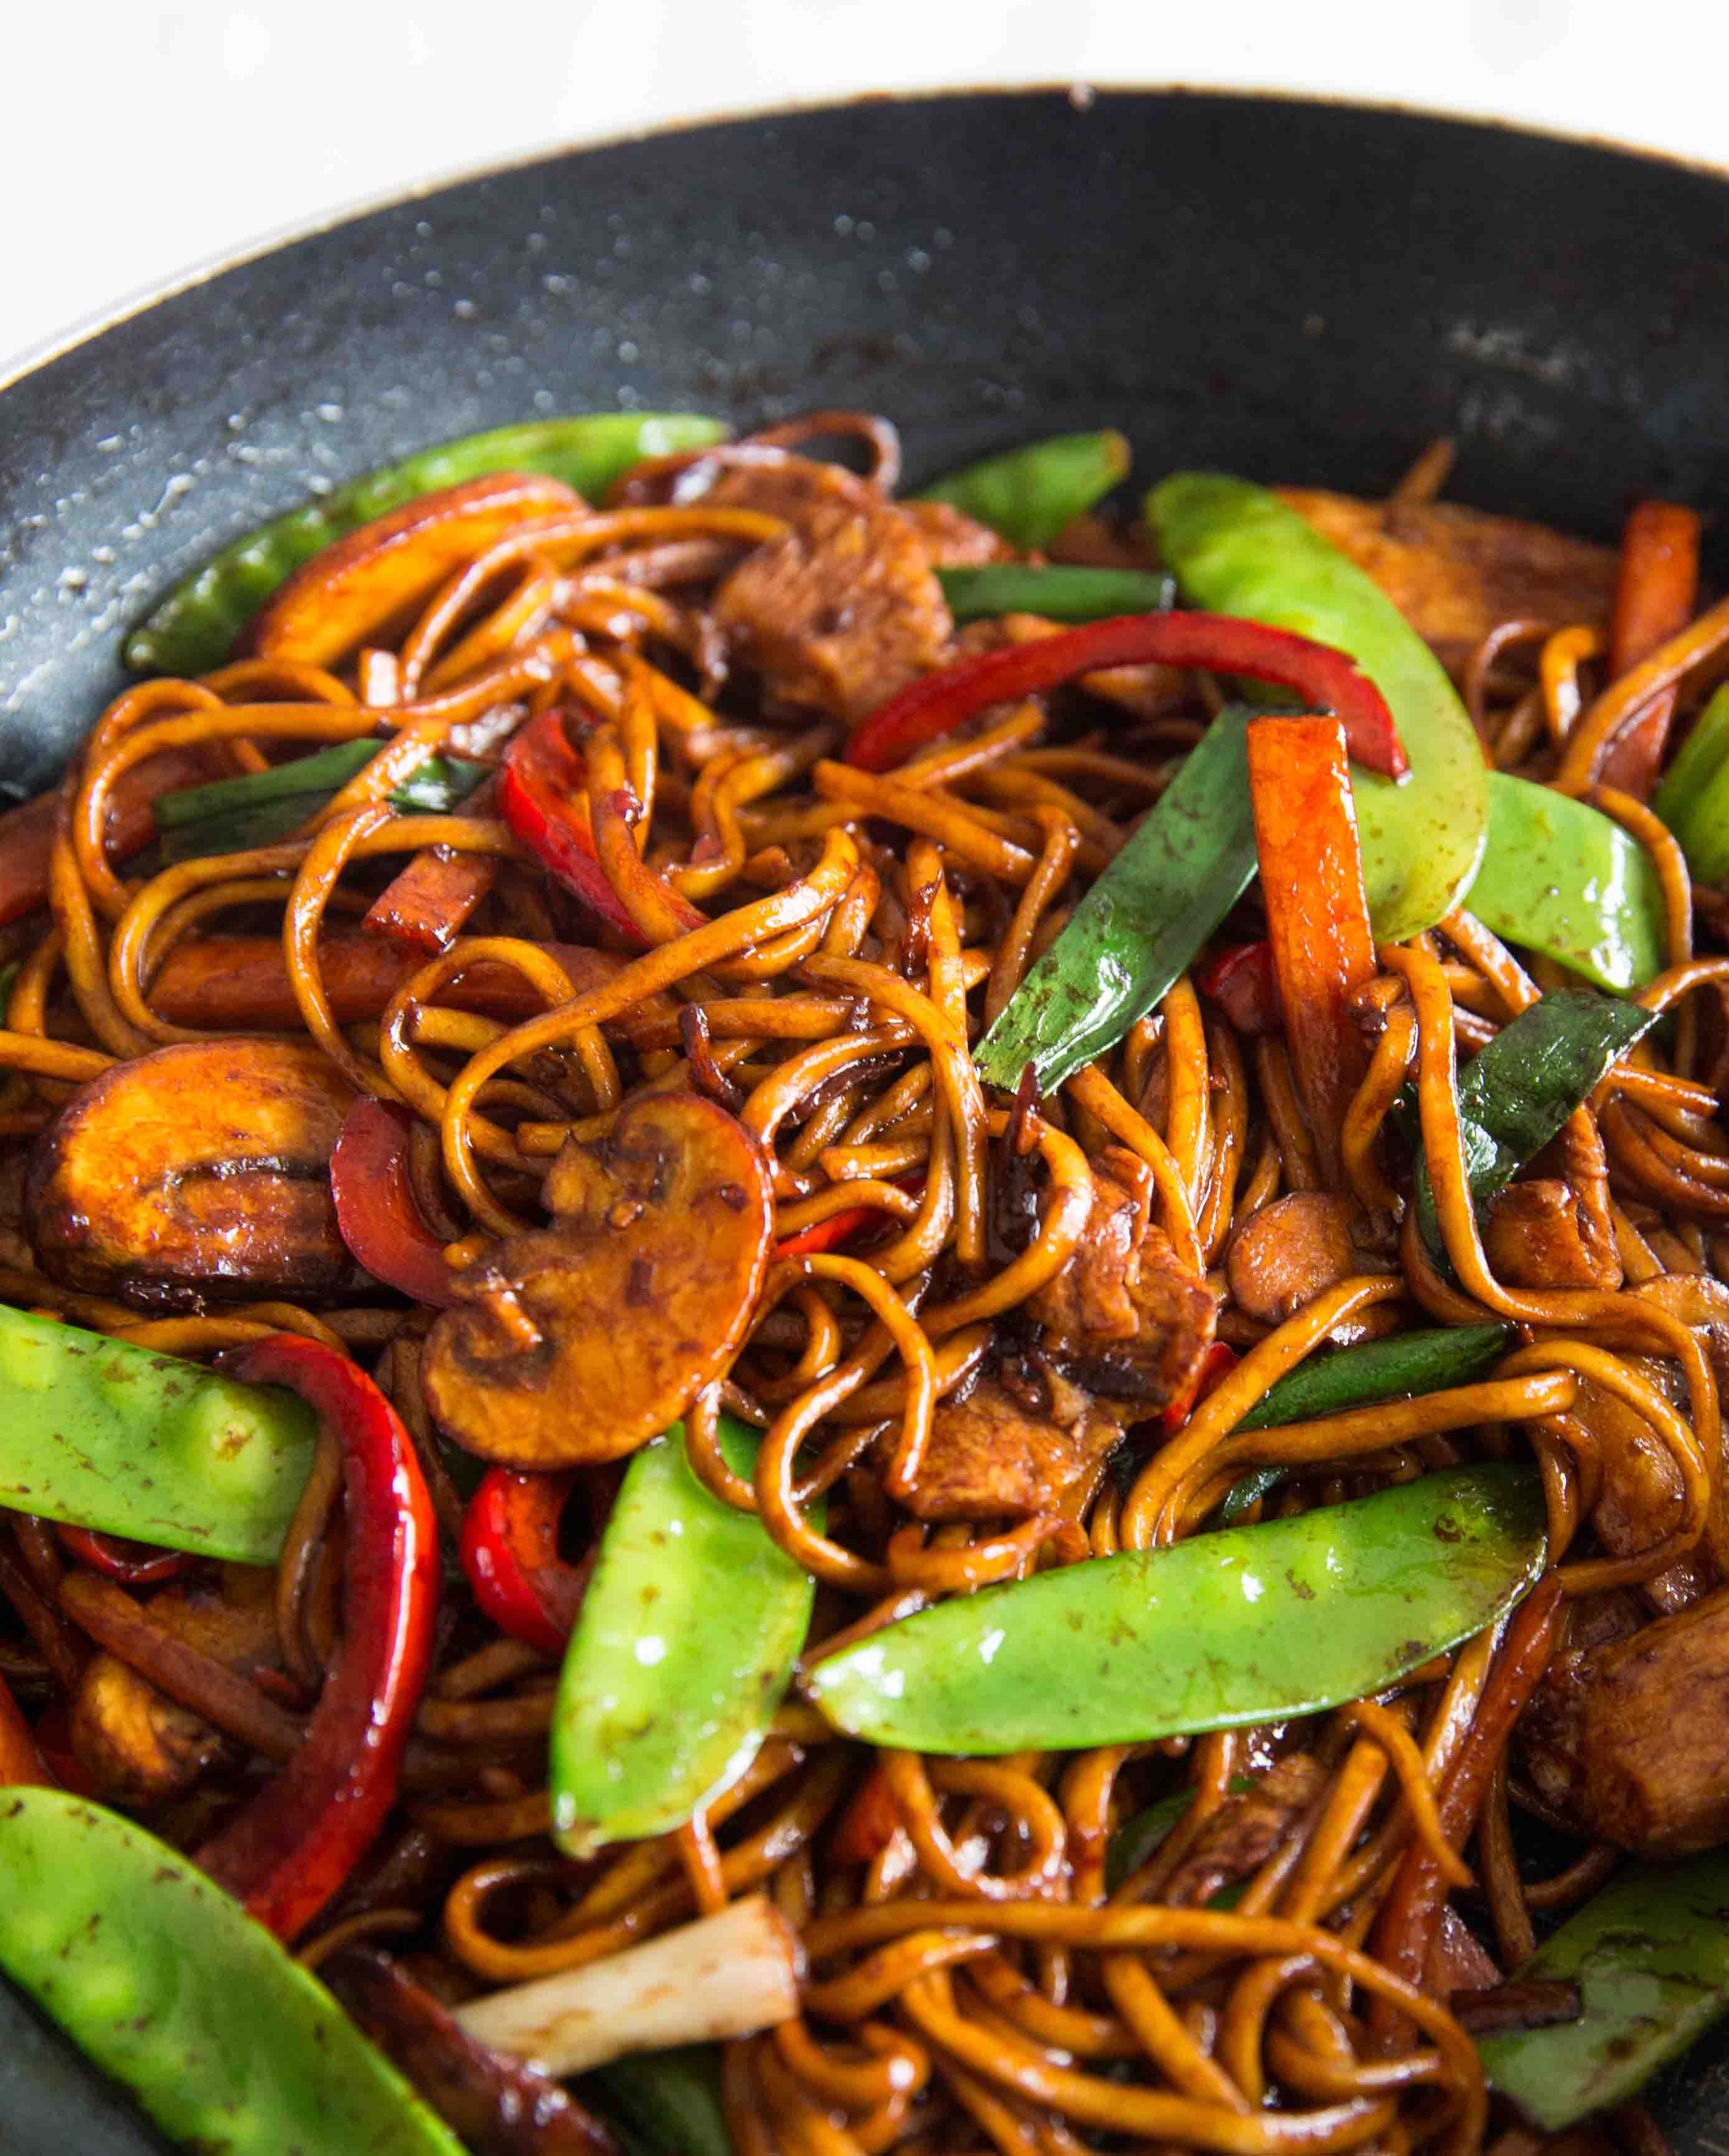 https://www.dontgobaconmyheart.co.uk/wp-content/uploads/2018/04/delicious-and-easy-chicken-noodle-stir-fry-13.jpg